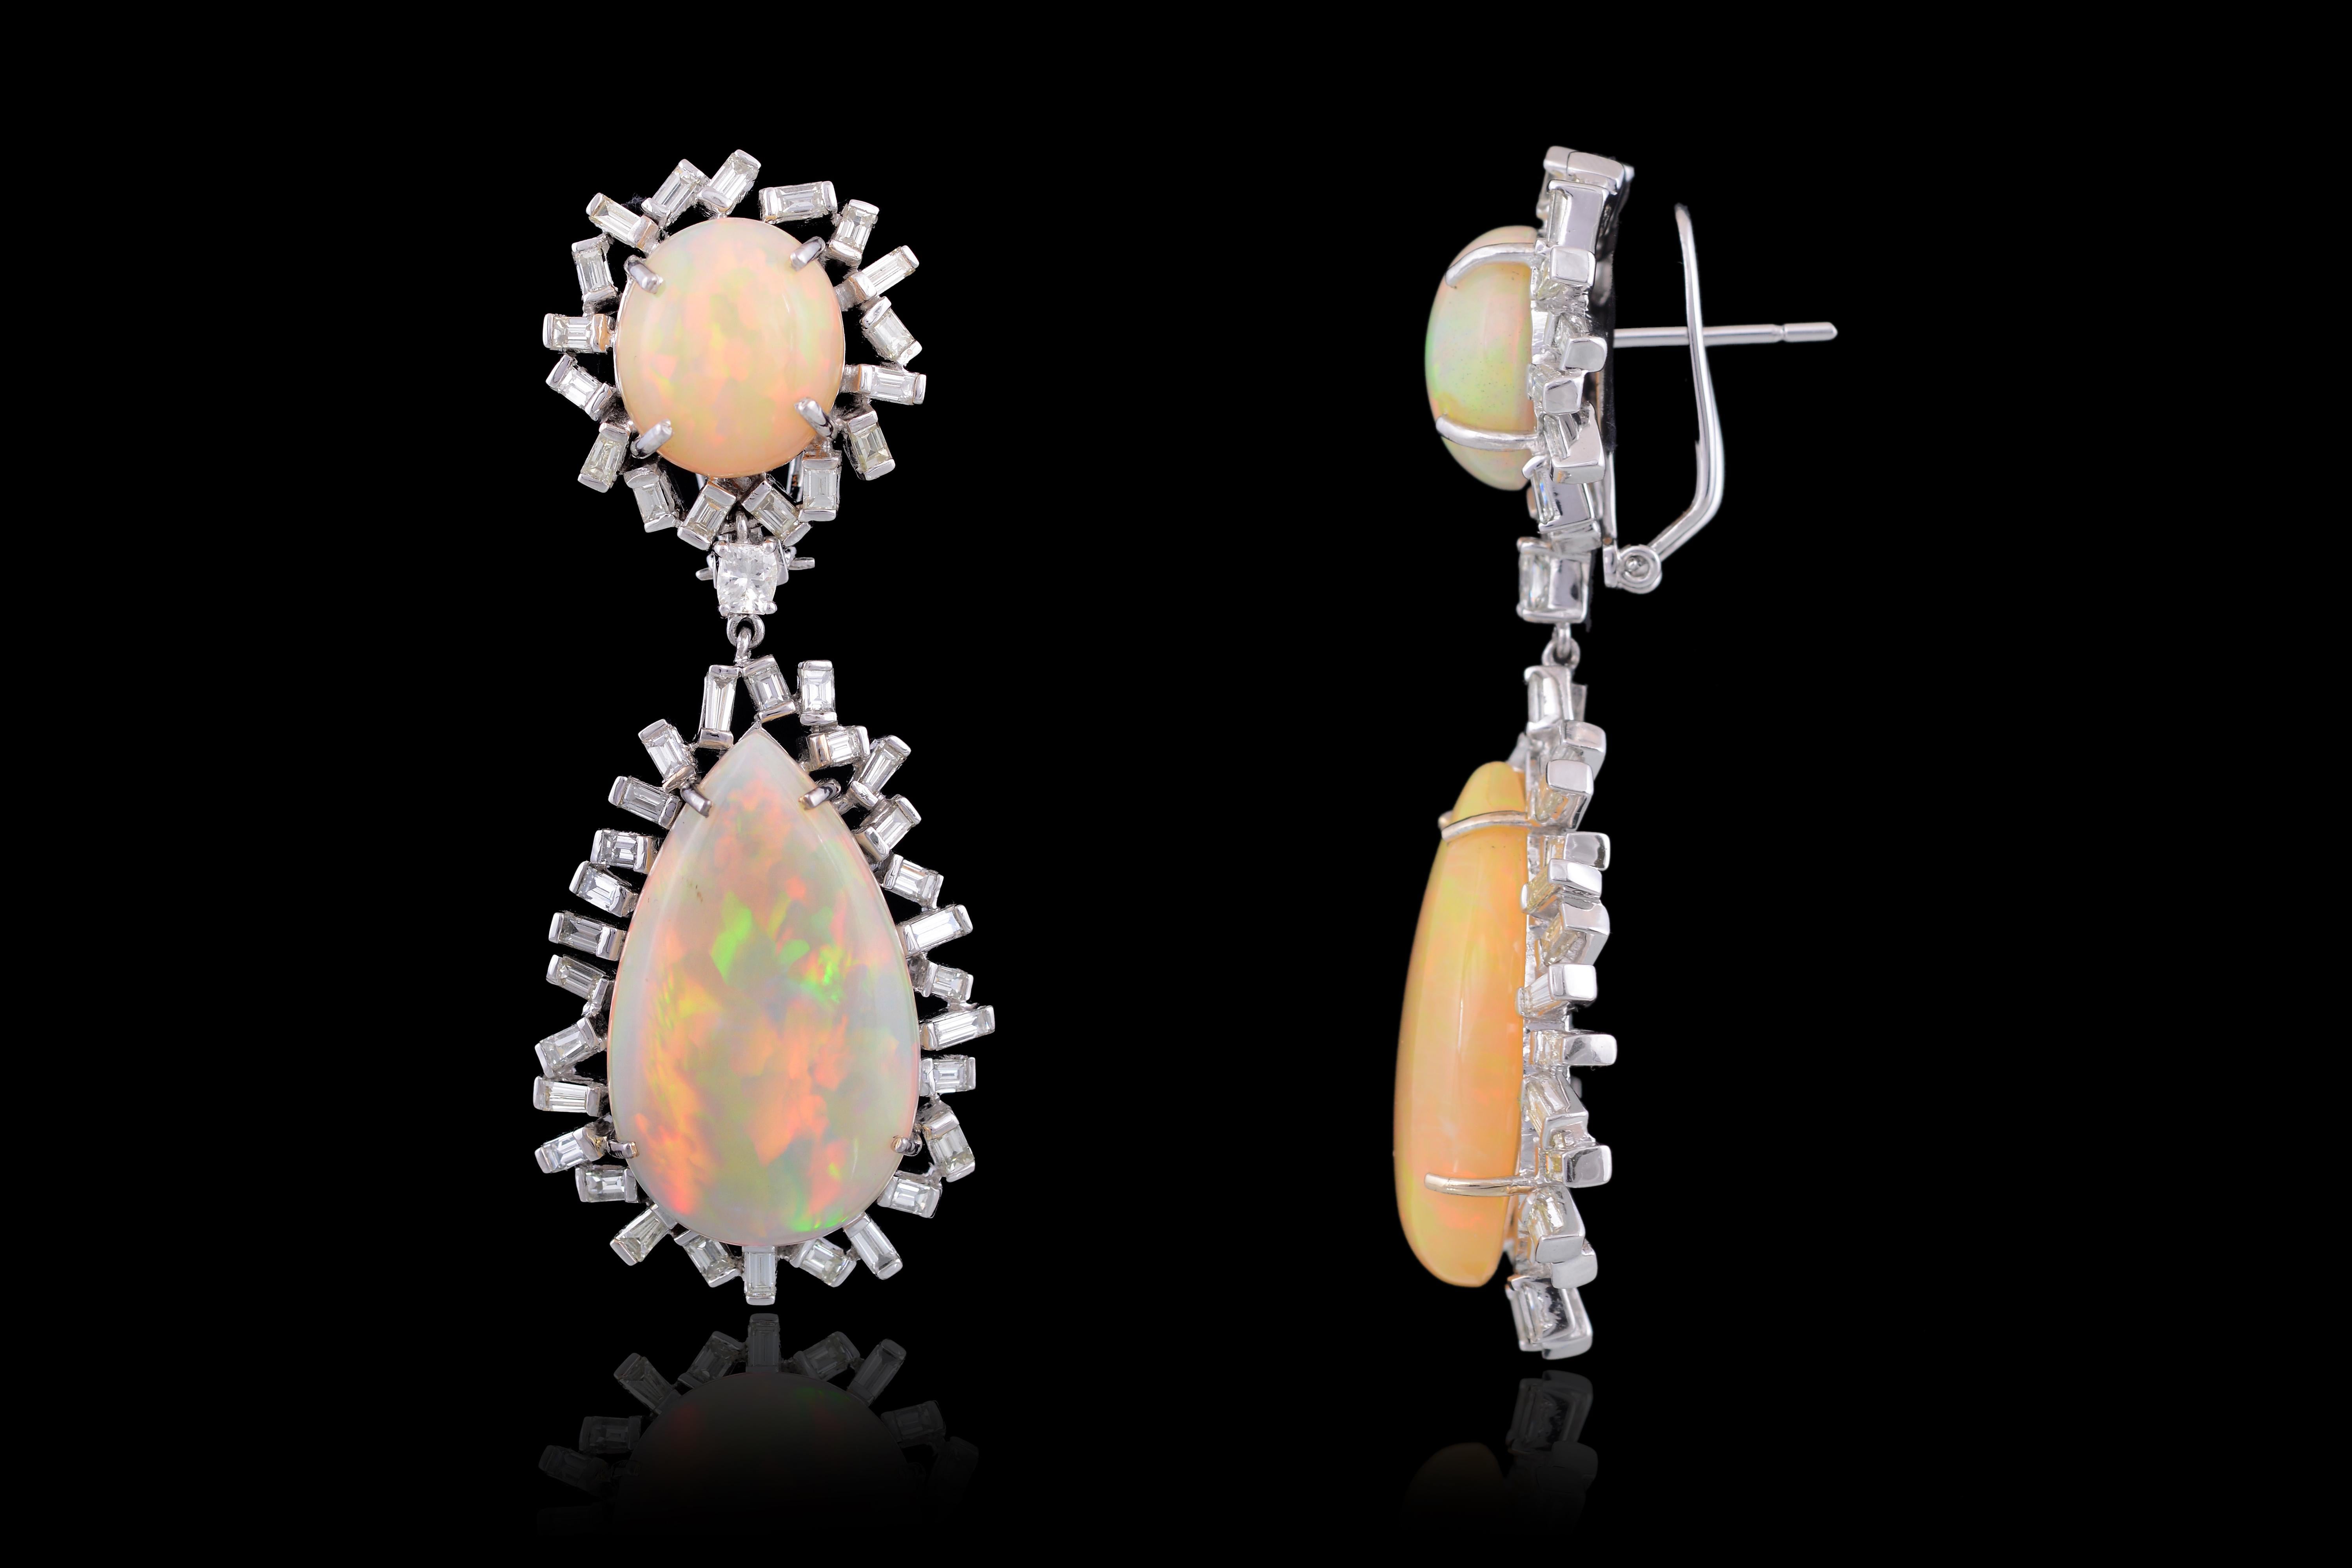 Gorgeous Ethiopian mix and match earrings set in 18K white gold with baguette diamonds set in 18K white gold. The earrings are made in art deco style with a mix and match concept. The total weight of opals is 41.92 carats, whereas the diamonds weigh